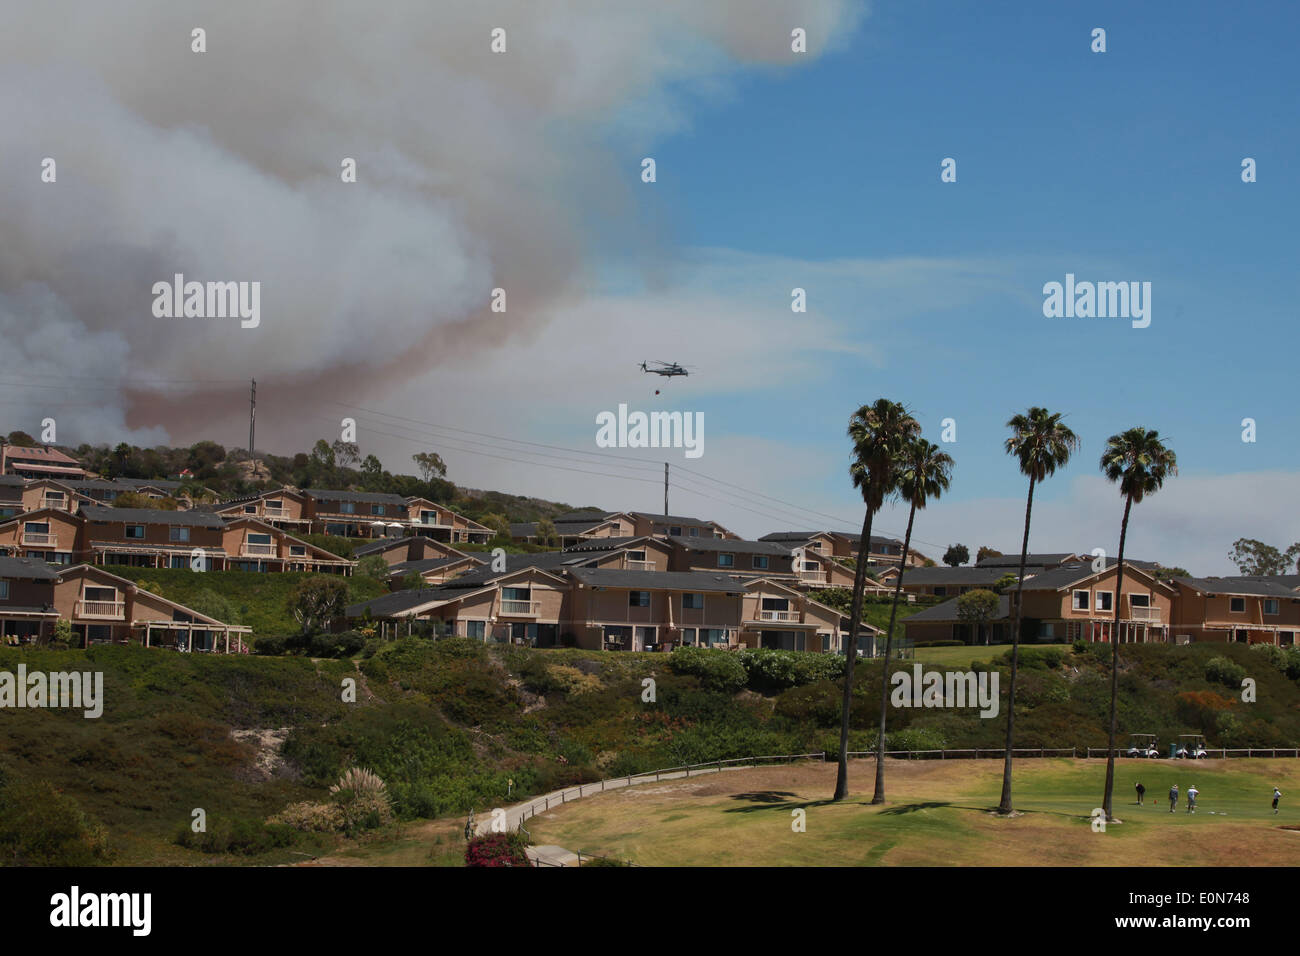 San Clemente, California, USA. 16th May, 2014. San Clemente residents play golf as fire fighting aircraft douse the nearby Las Pulgas wildfire inside Camp Pendleton marine Base. The wildfire in the western region of Camp Pendleton has grown to 8,000 acres burned, base officials confirmed, known as the Las Pulgas Fire, is 5 percent contained, officials said. California firefighters have continued to battle wildfires, which have scorched more than 11,000 acres and caused thousands to evacuate. Credit:  ZUMA Press, Inc./Alamy Live News Stock Photo